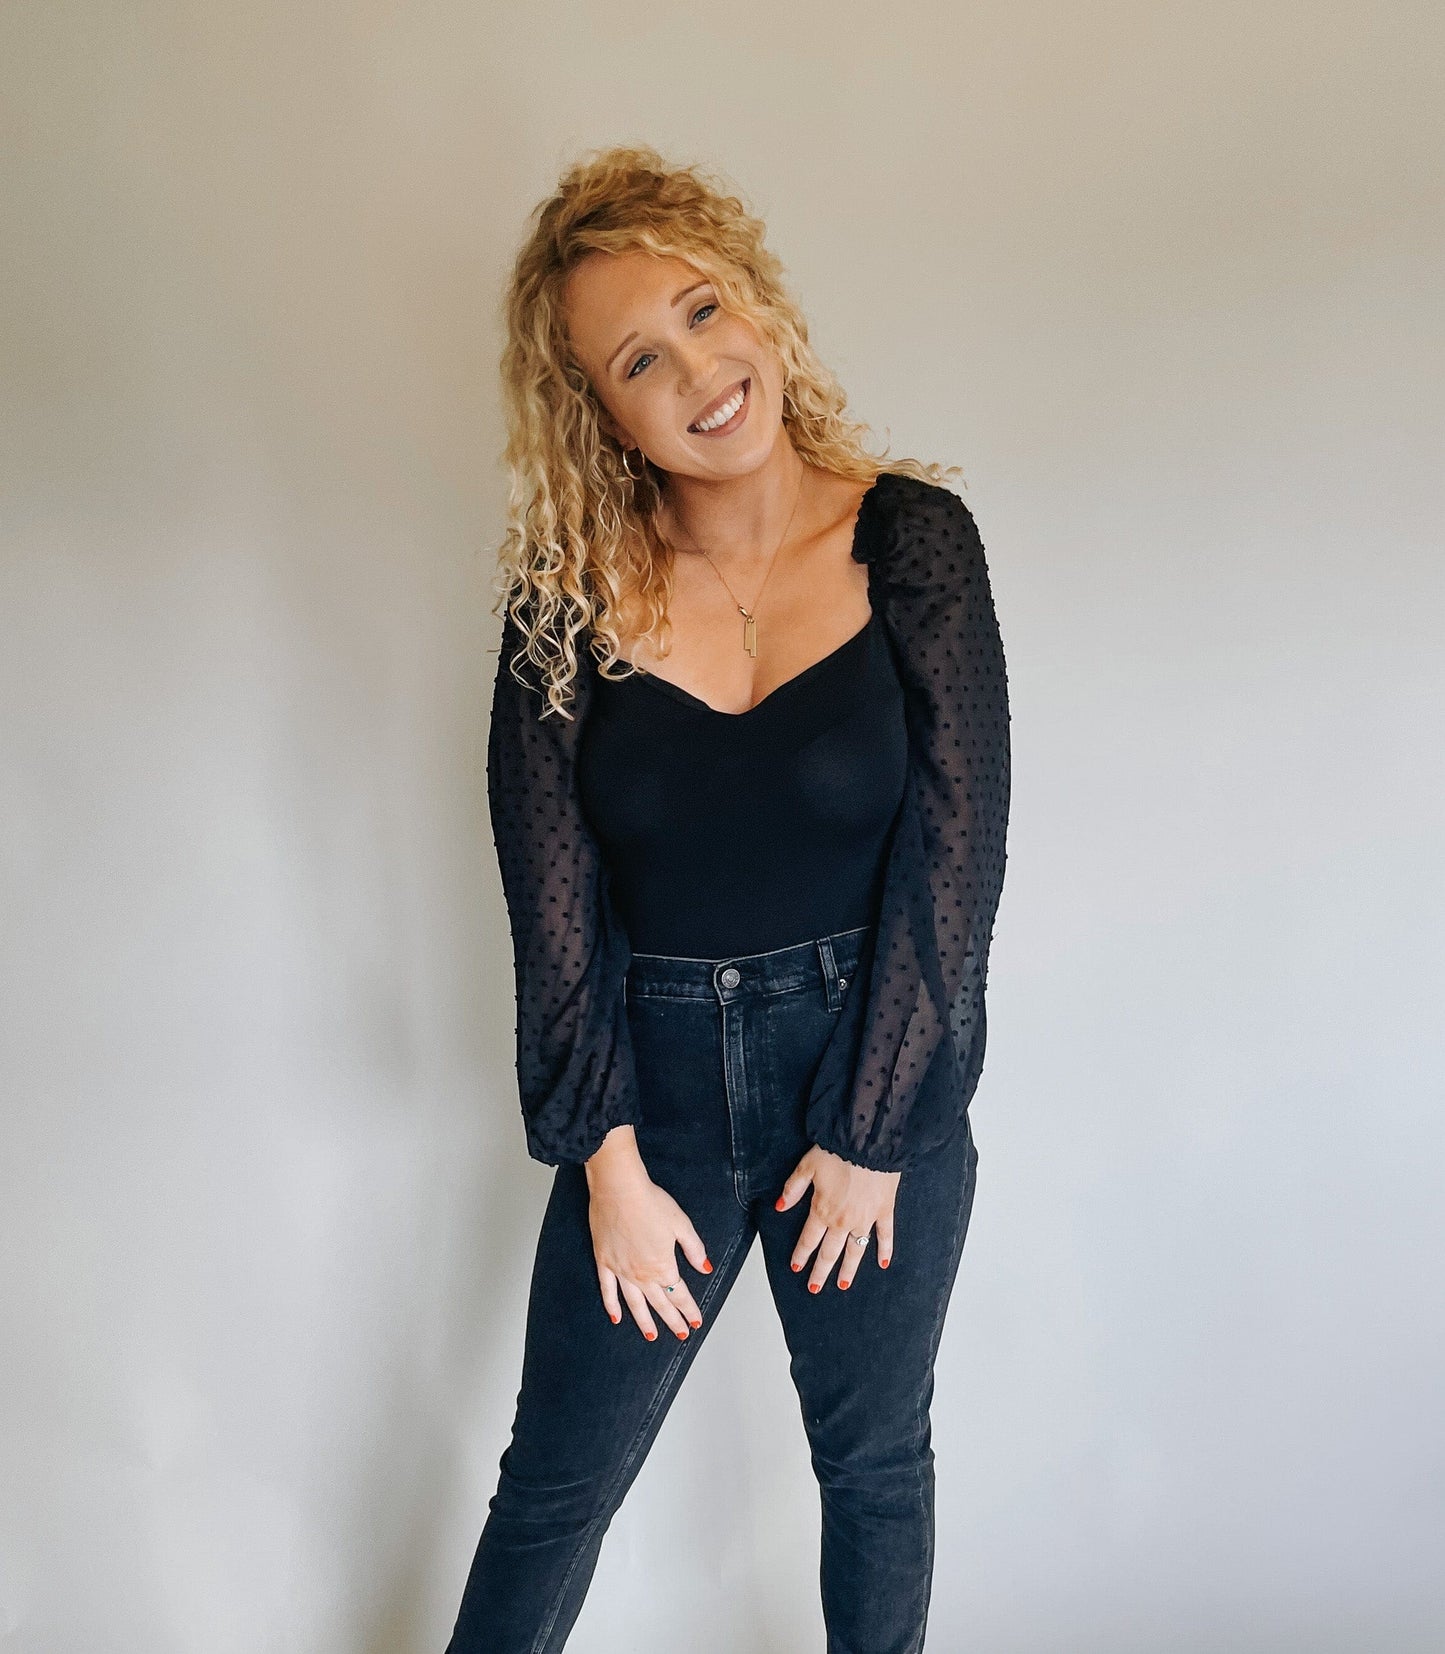 Smiling model wearing a black bodysuit and black jeans poses for the camera, exuding confidence and style.